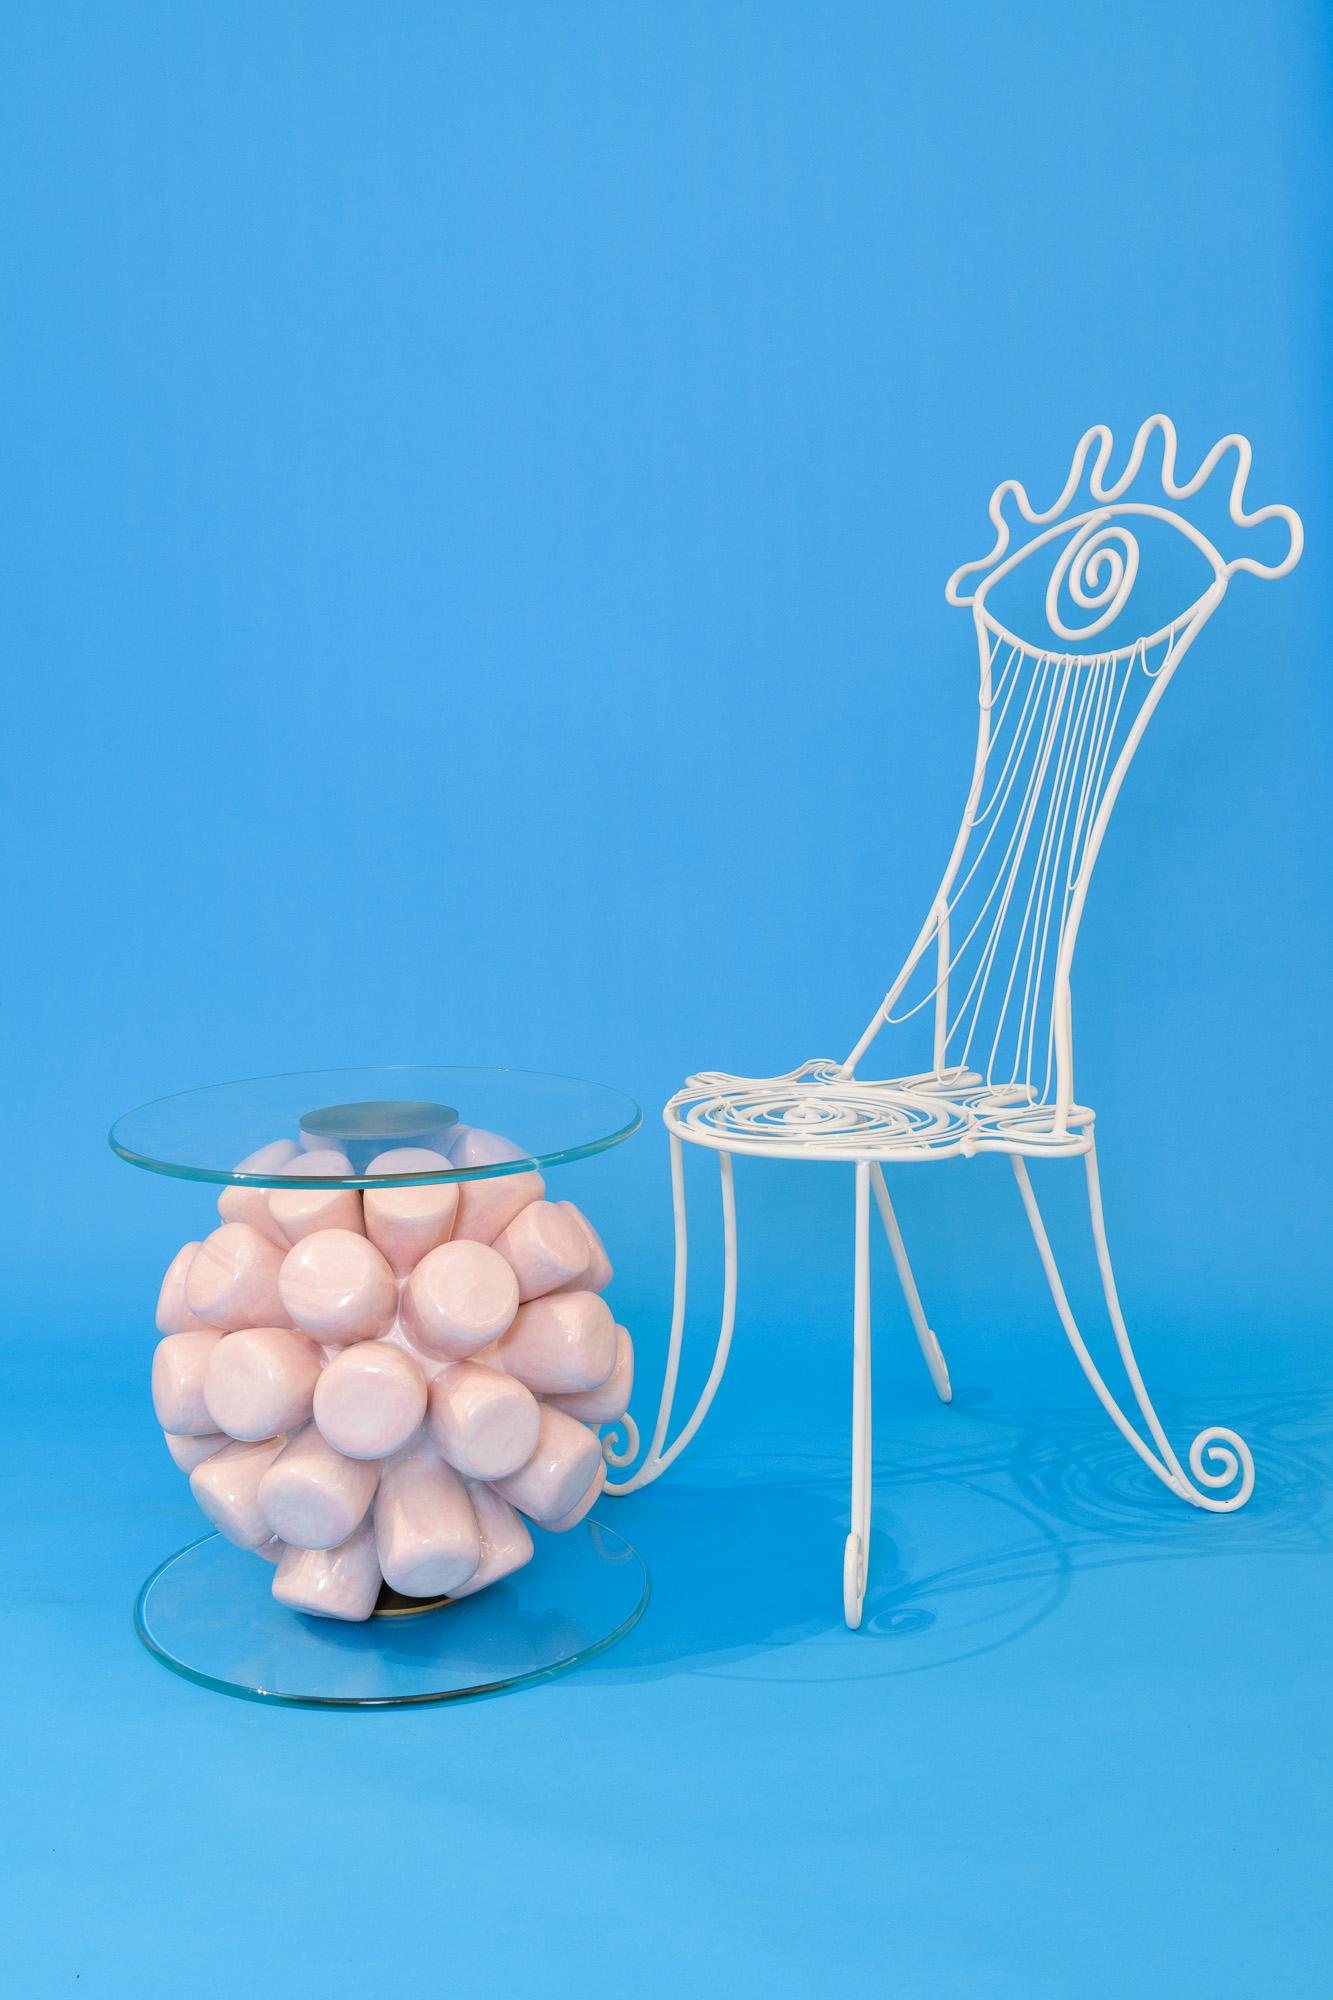 Atomic Marshmallow Bedside Table 

Charlotte Colbert is an award-winning filmmaker and multi-media artist.

Her work has been shown at galleries, art fairs and institutions internationally, including the V&A, Montpellier Contemporain, Frieze & Art